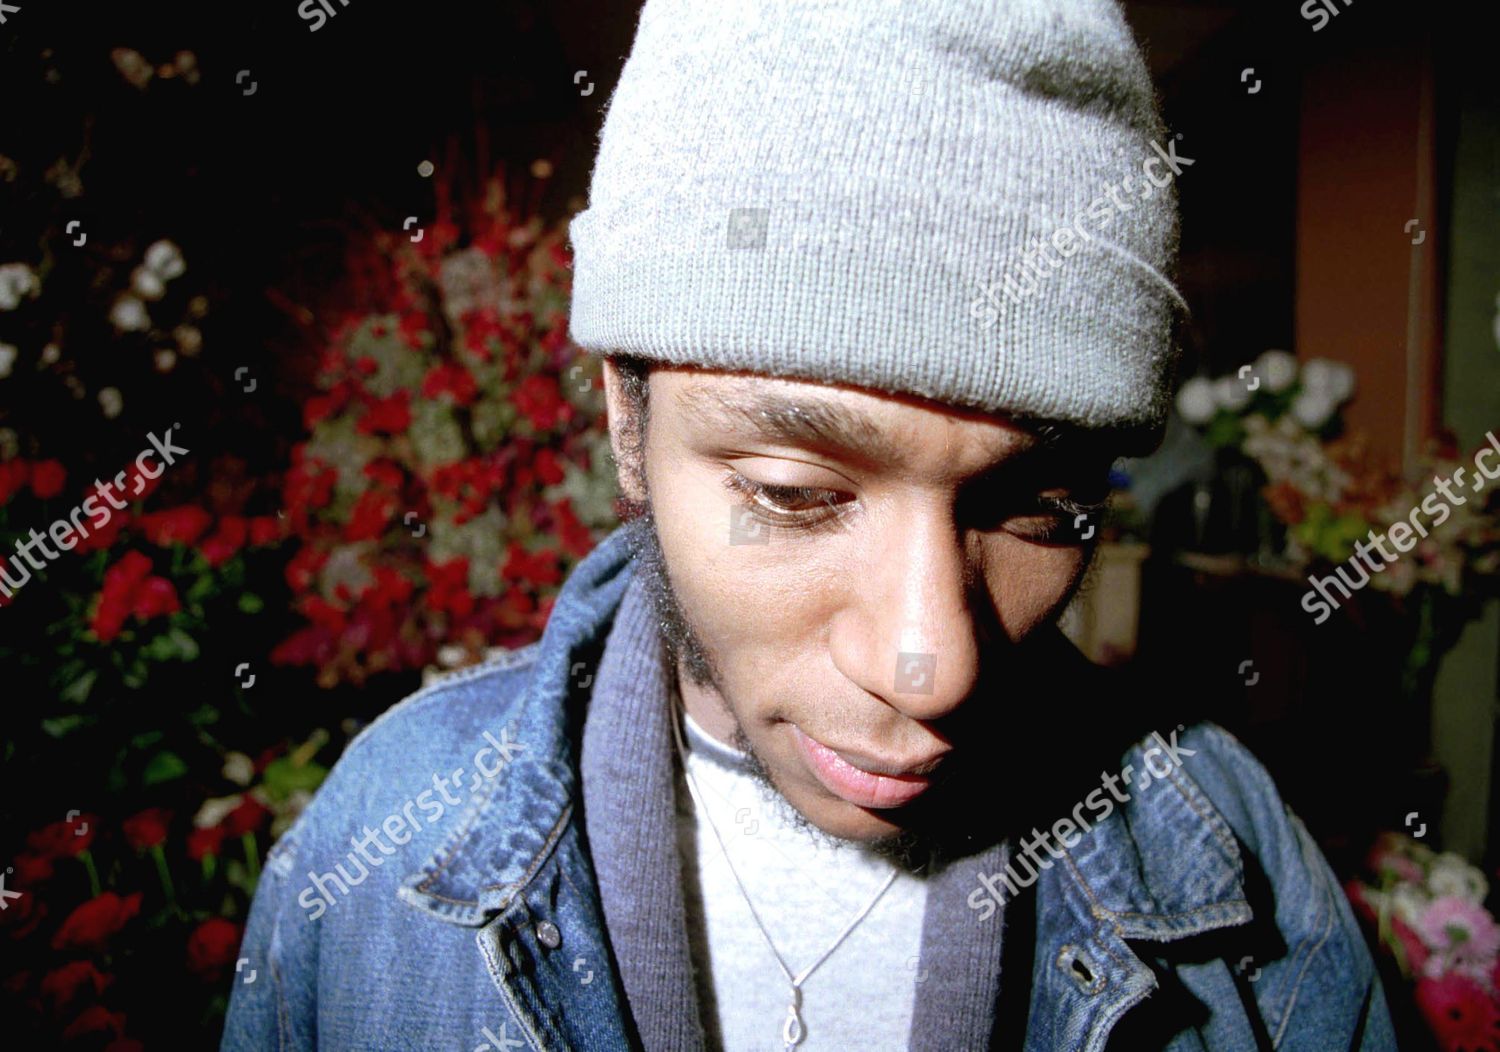 Mos Def Editorial Stock Photo - Stock Image